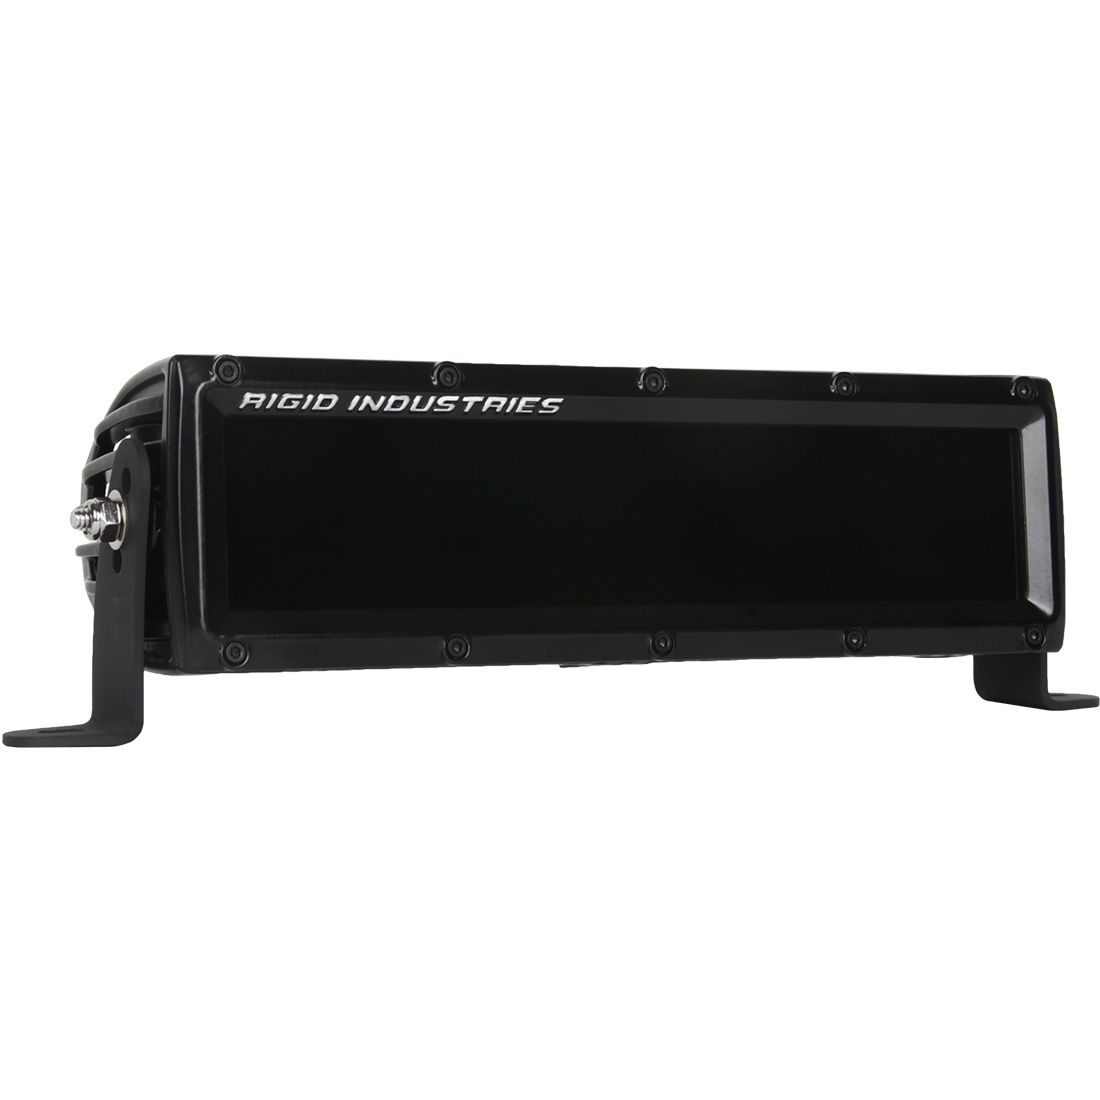 Rigid Industries 10 Inch Spot/Flood Combo Infrared E-Series Pro